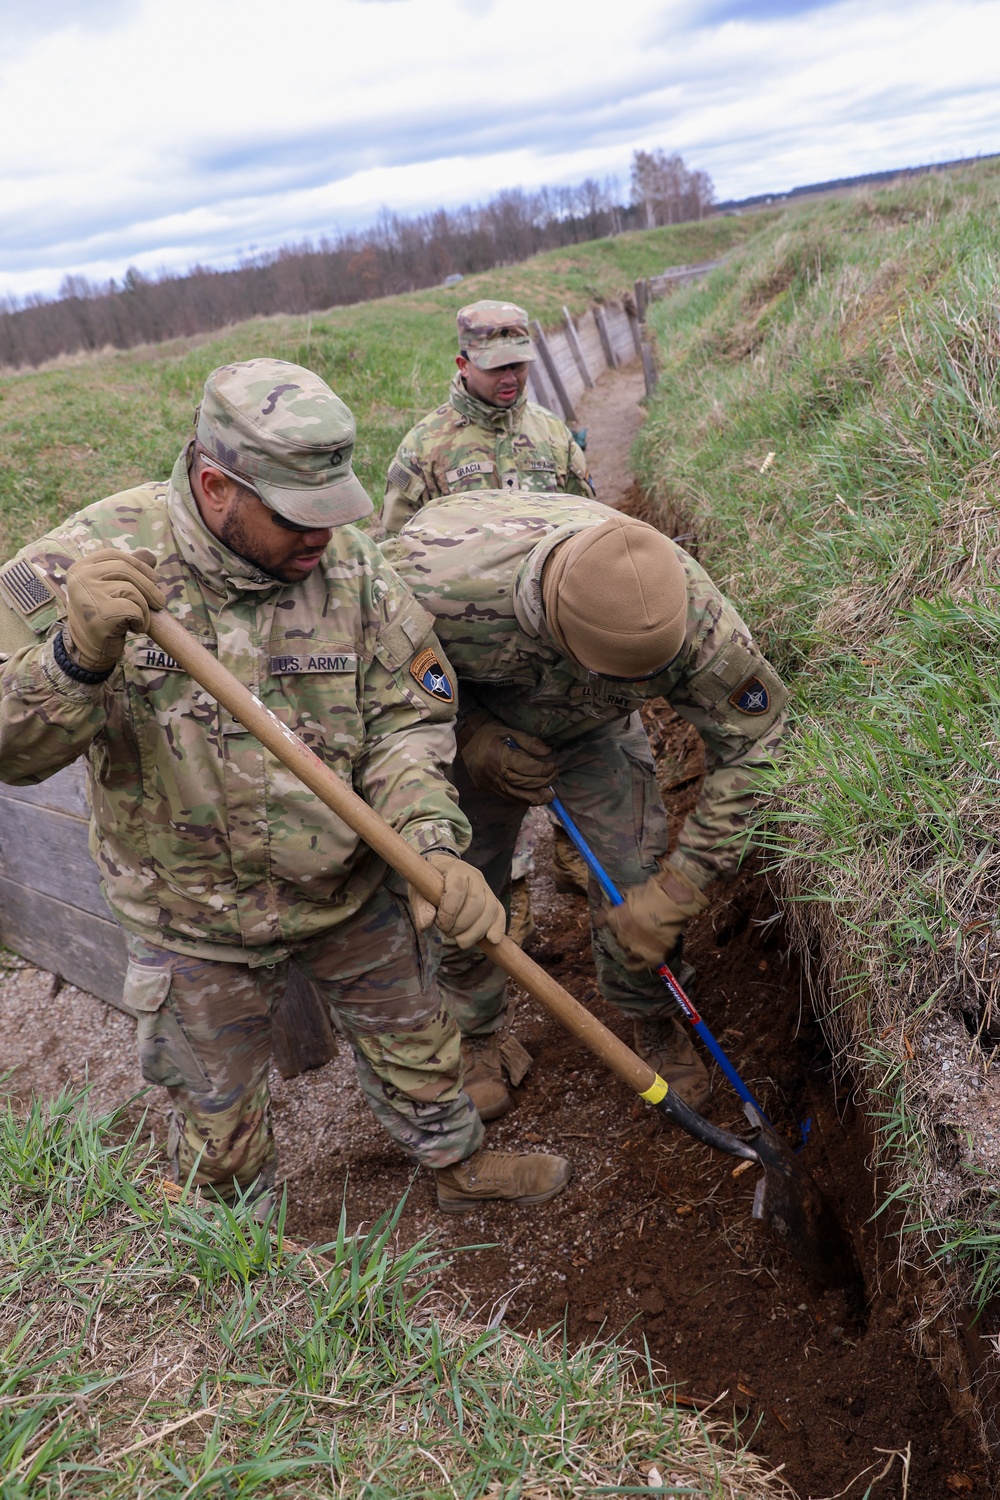 Engineers build and maintain trenches in Bemowo Piskie Training Area